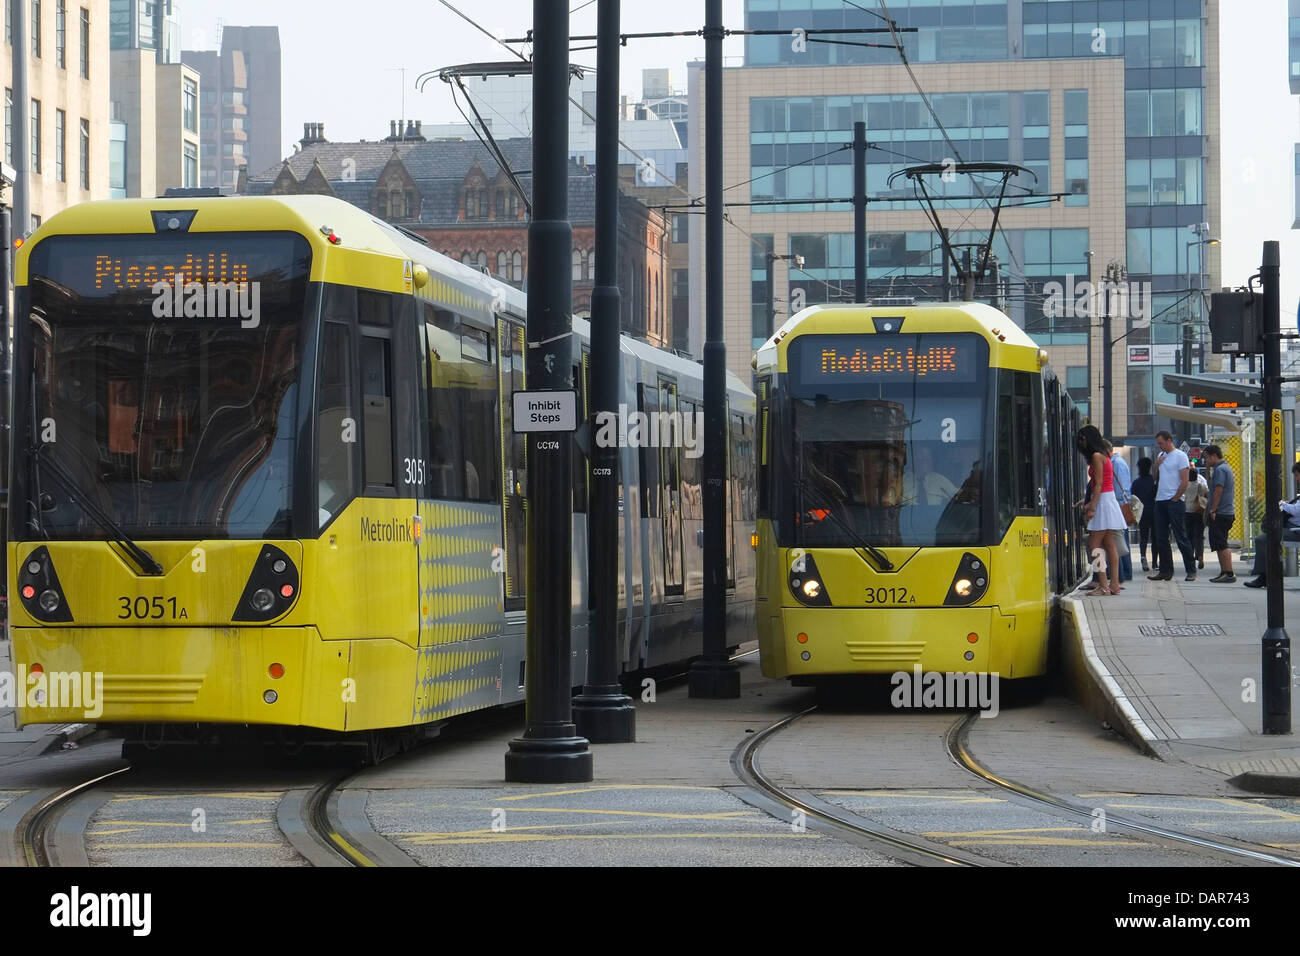 England, Manchester, St Peter's Square tram stop Stock Photo